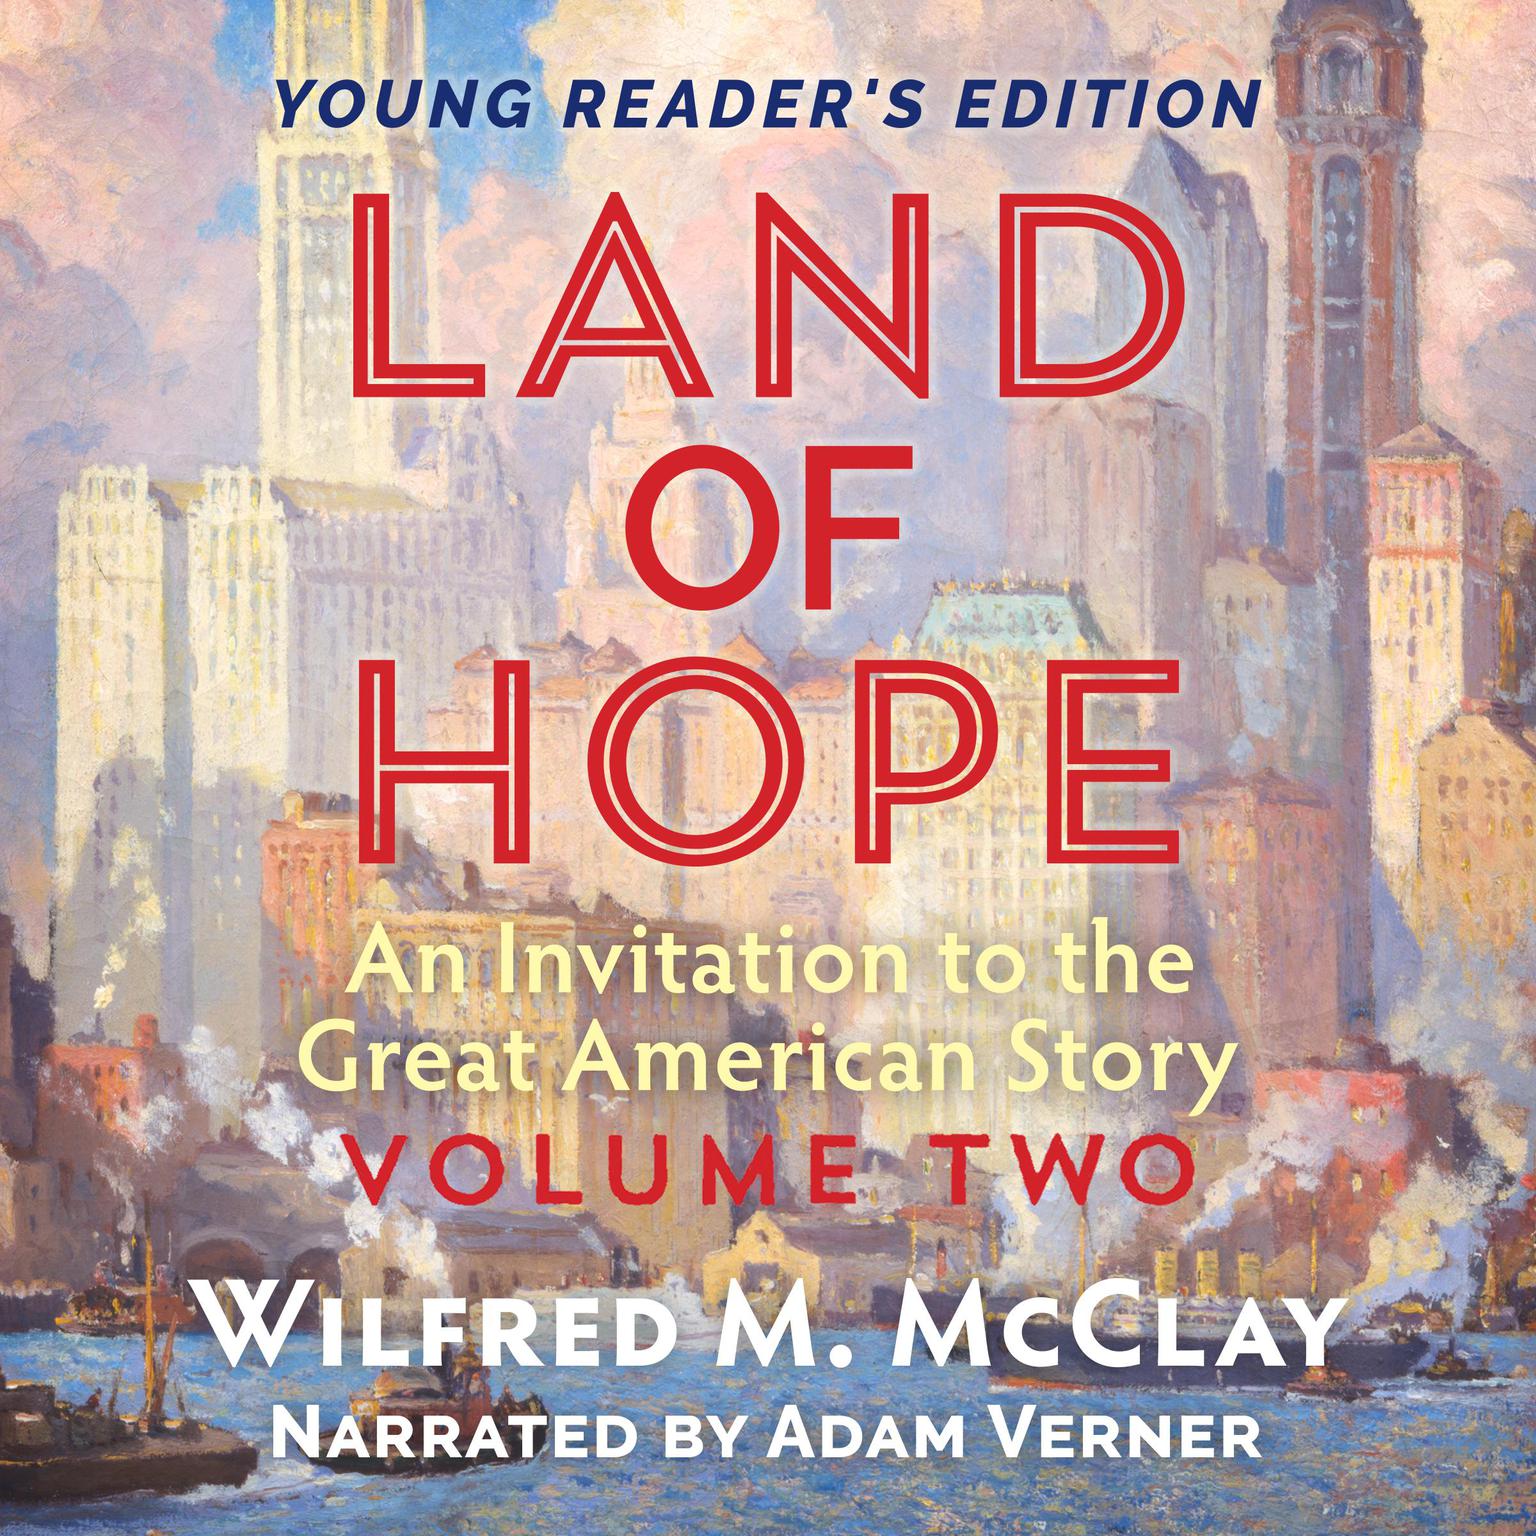 Land of Hope: An Invitation to the Great American Story Audiobook, by Wilfred M. McClay